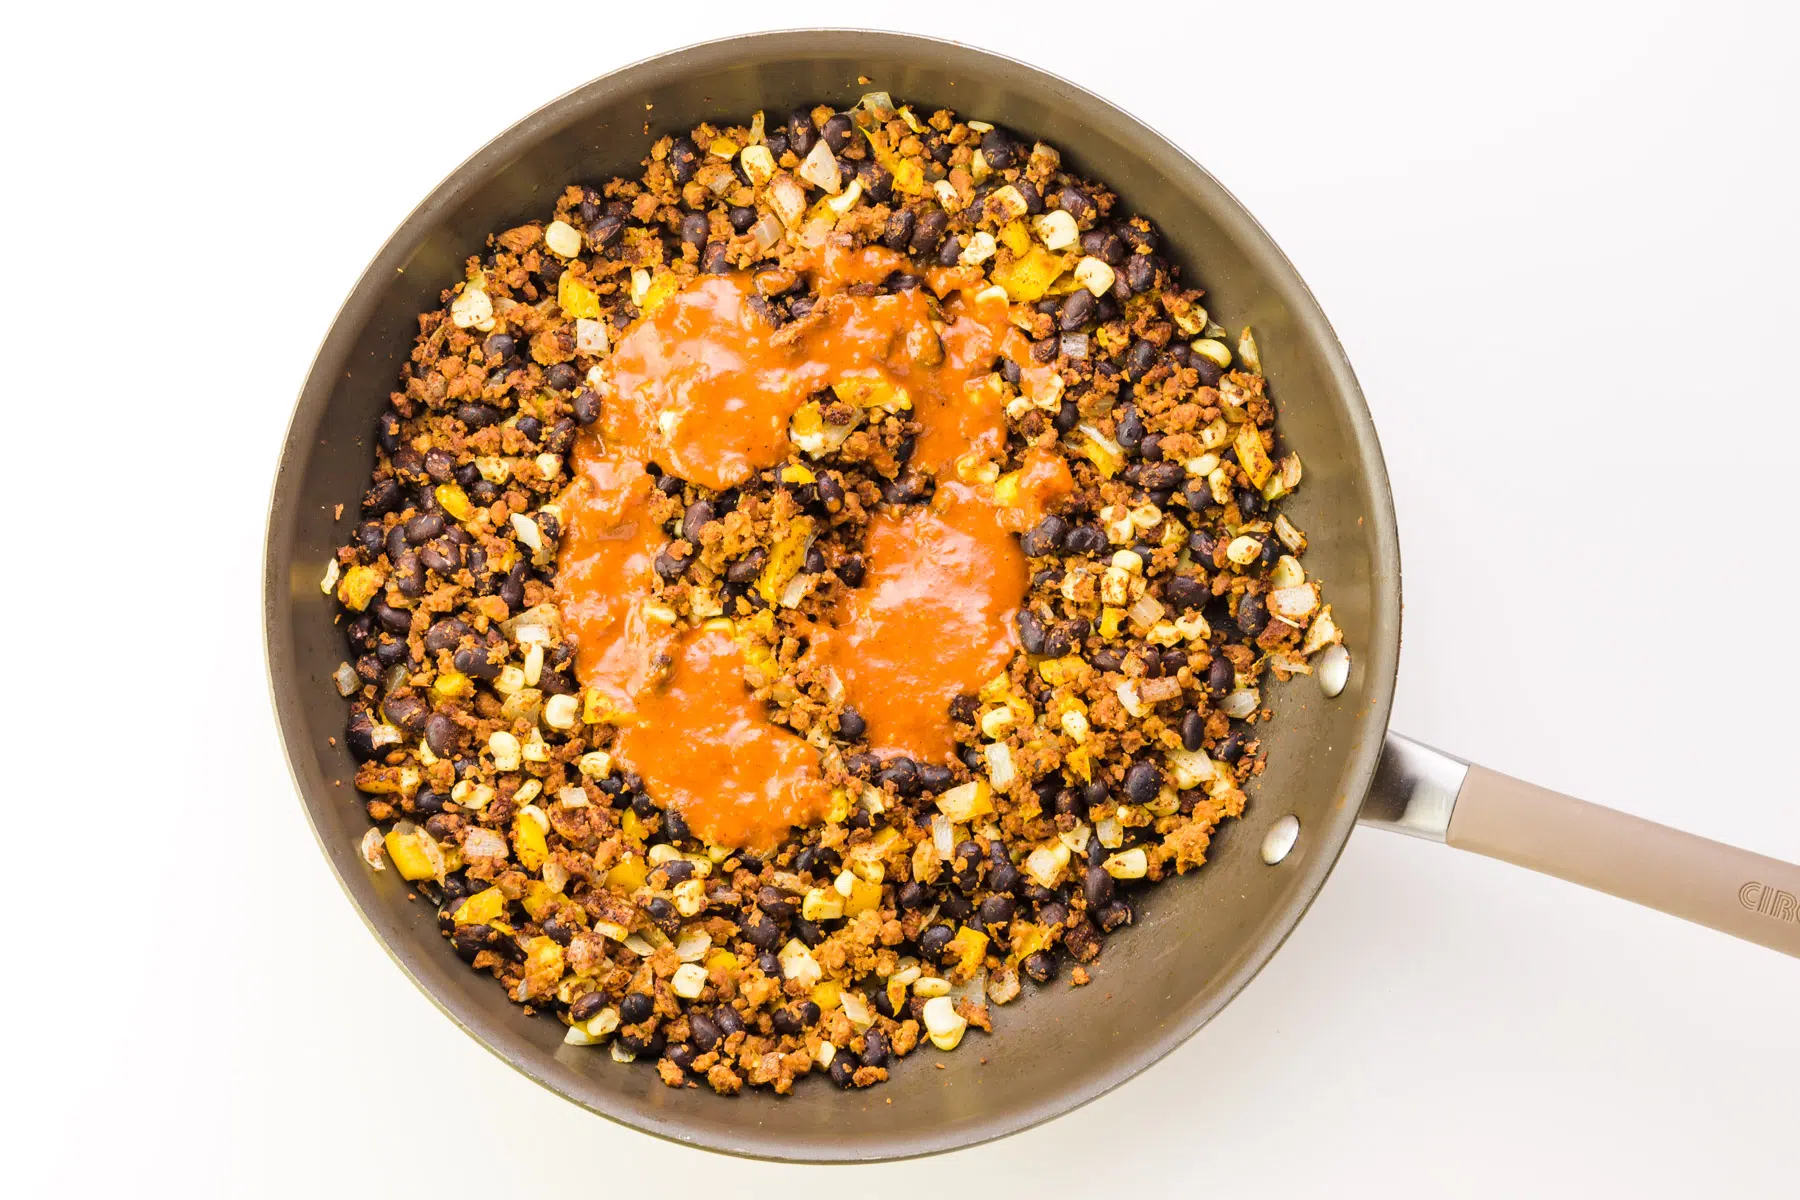 A veggie crumble mixture is cooking in a skillet. There is enchilada sauce drizzled over the top.